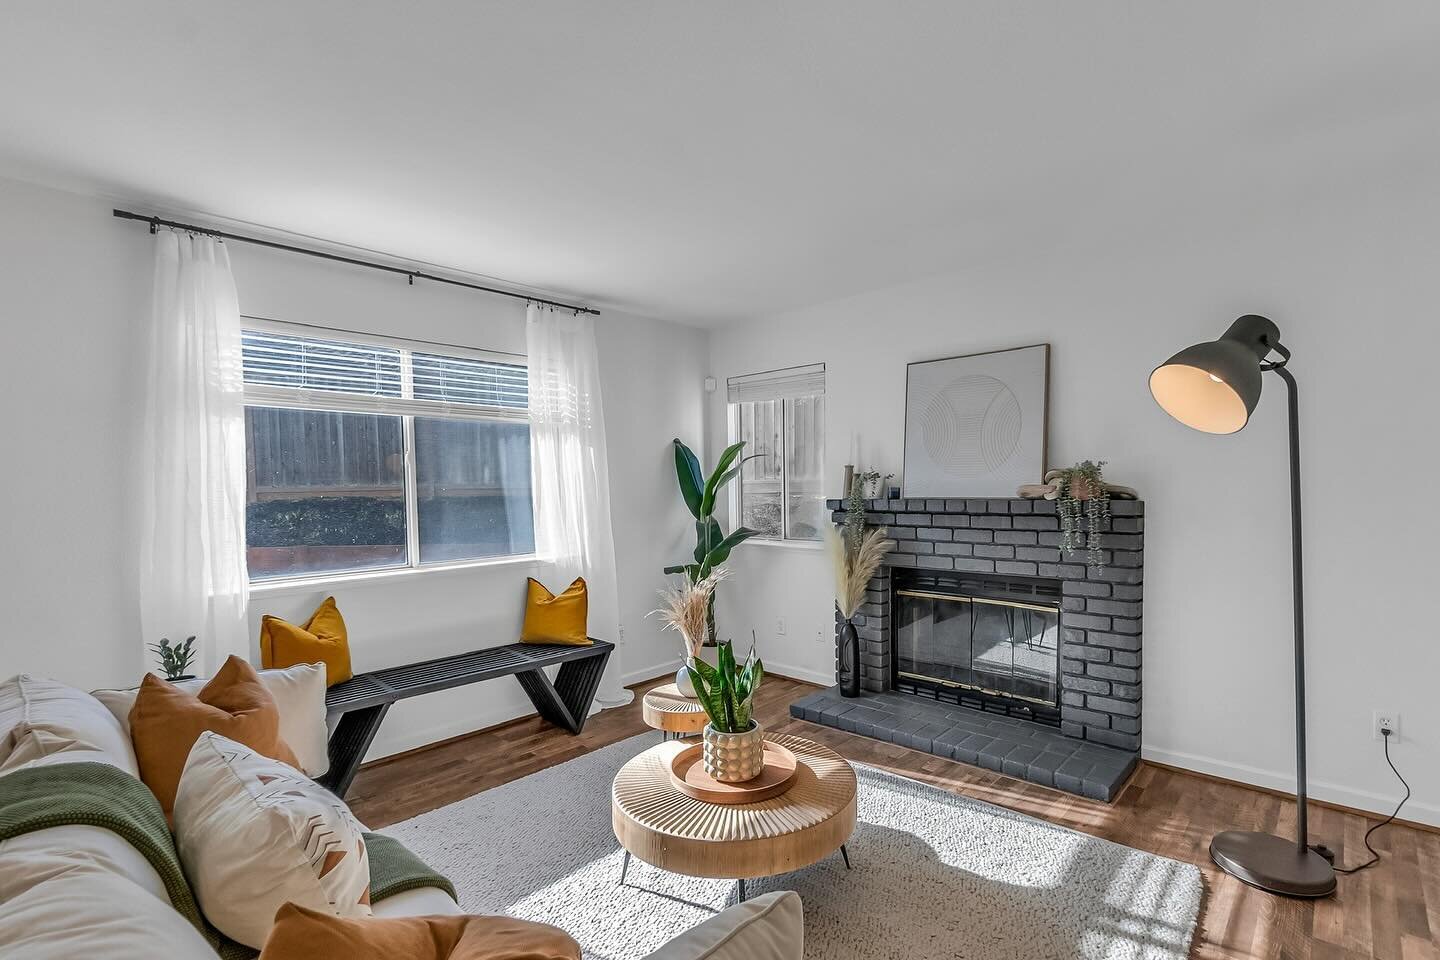 A strong stager should get your listing under contract in less than 2 weeks &hellip; Congrats to our amazing clients!🥳#stagedbycashmere #bayarearealestate #homestaging